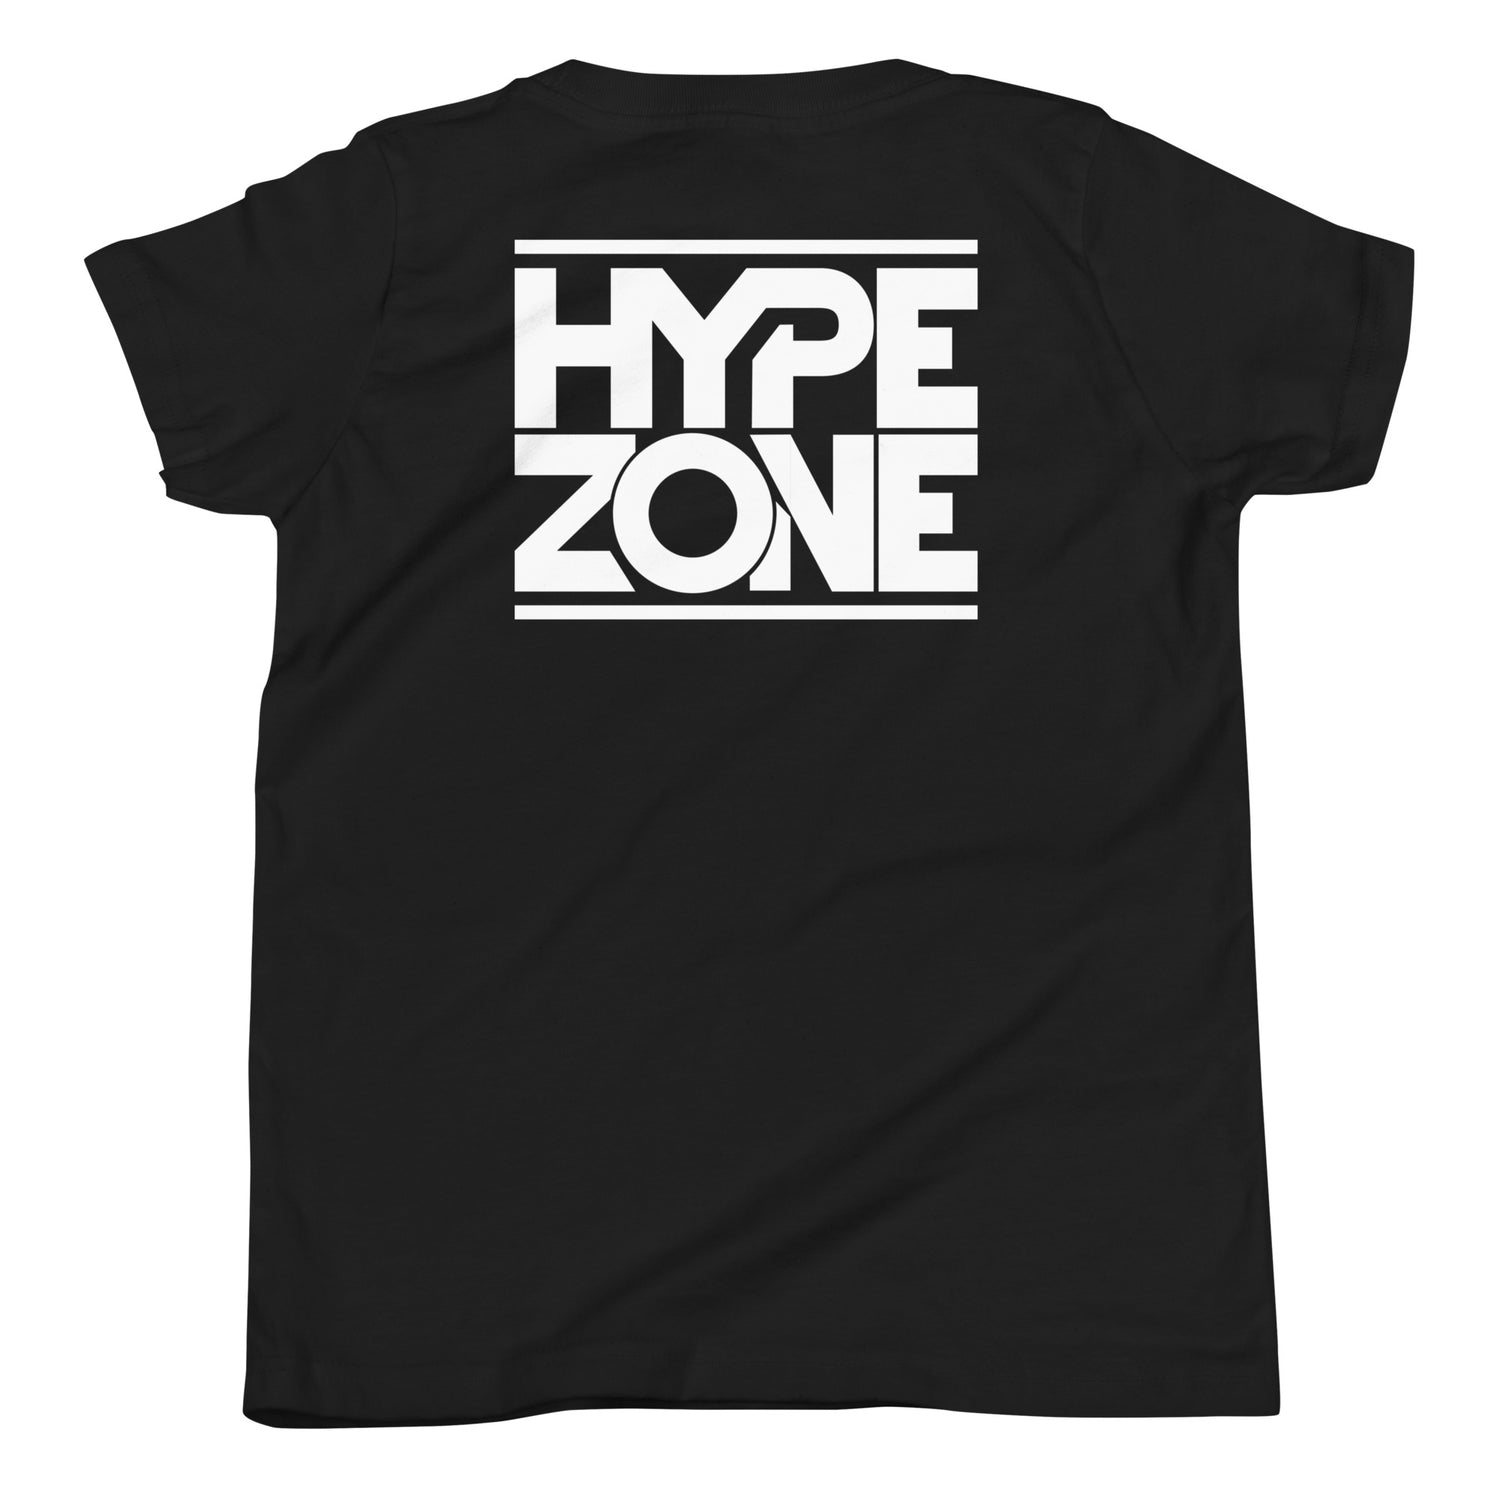 Hype Zone by James Murrell